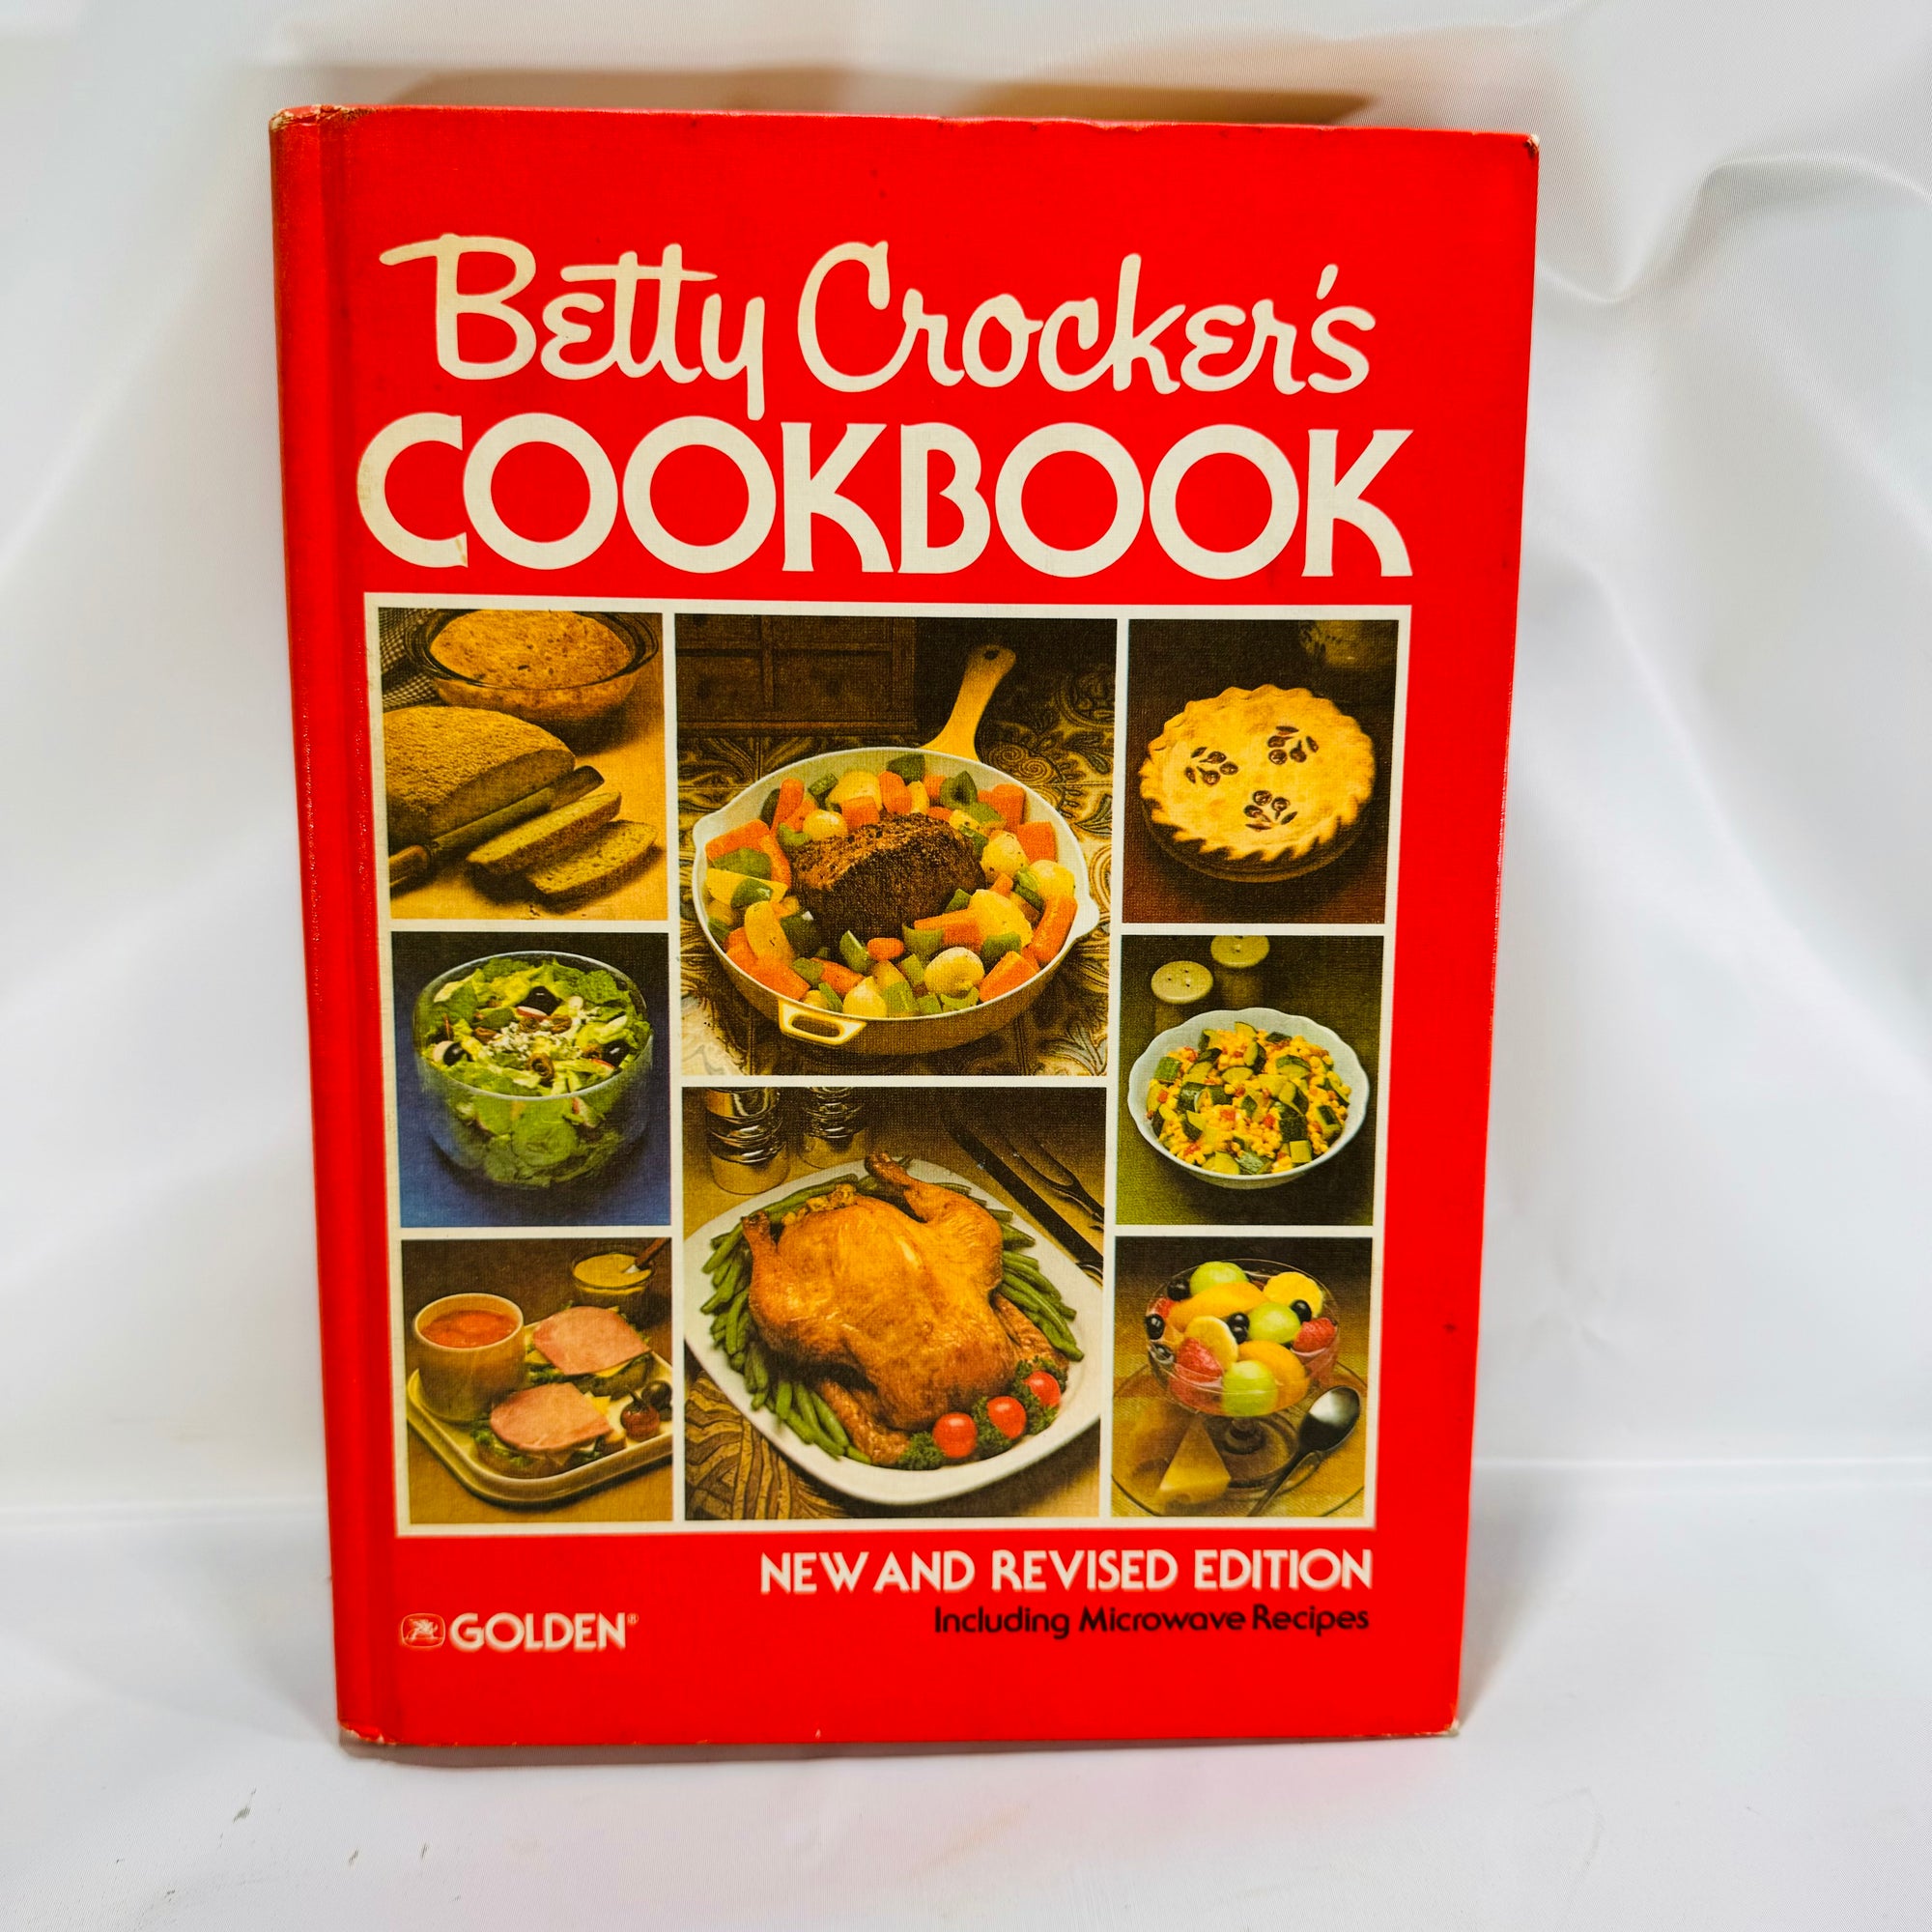 Betty Crocker Cookbook New and Revised Edition including Microwave 1982 General Mills Vintage Recipes Collectable Cooking